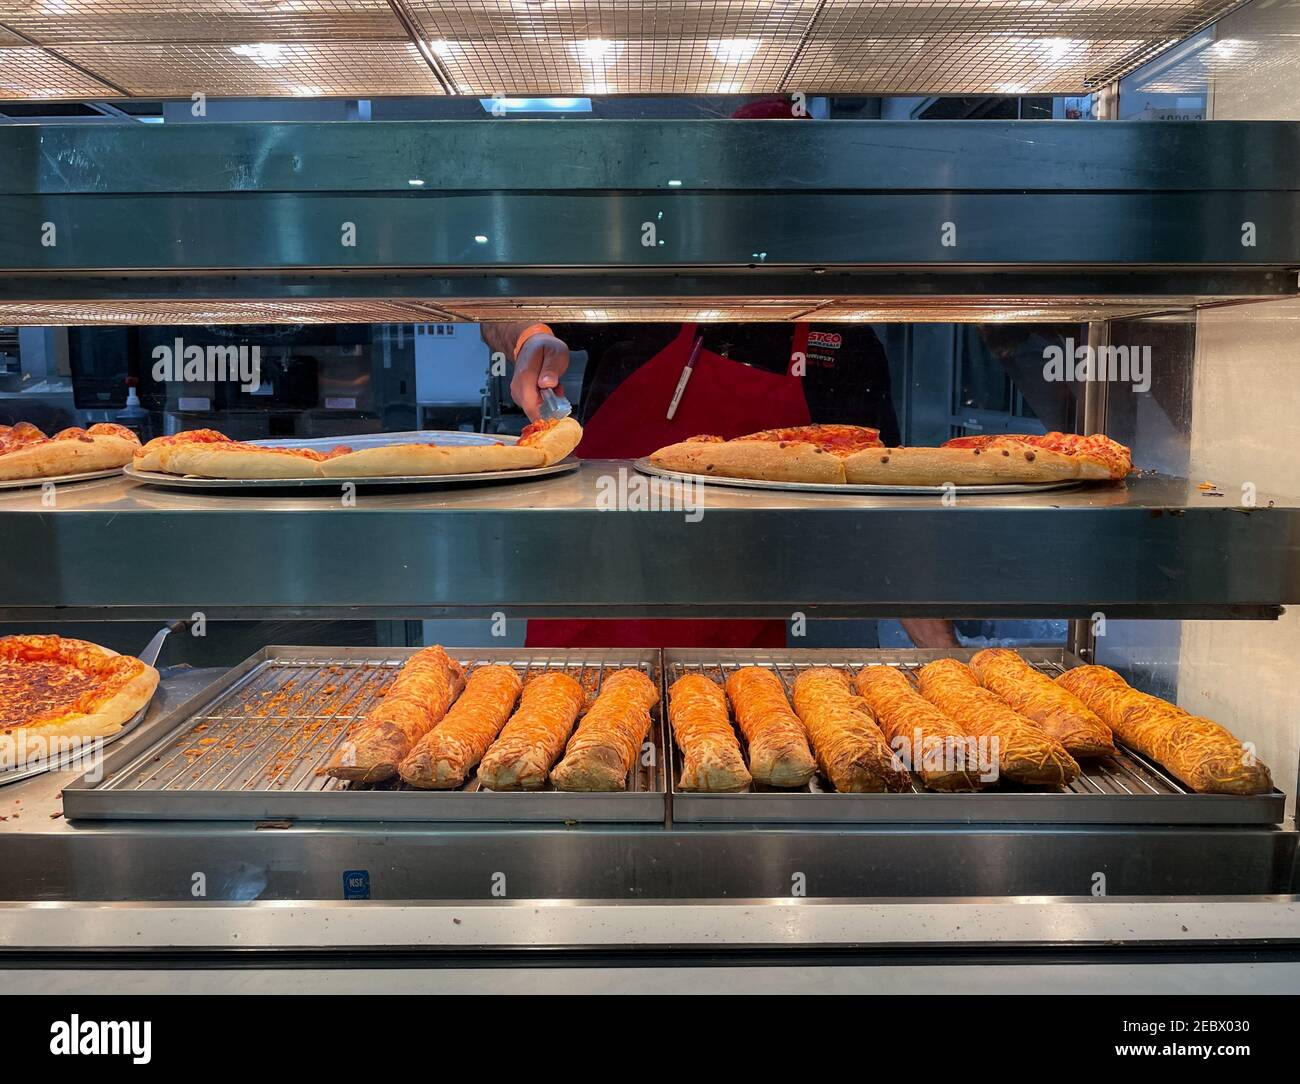 Signal Hill, CA USA - Jan 20, 2021: Close up view of Costco food court with an employee getting the pepperoni pizza from the tray Stock Photo